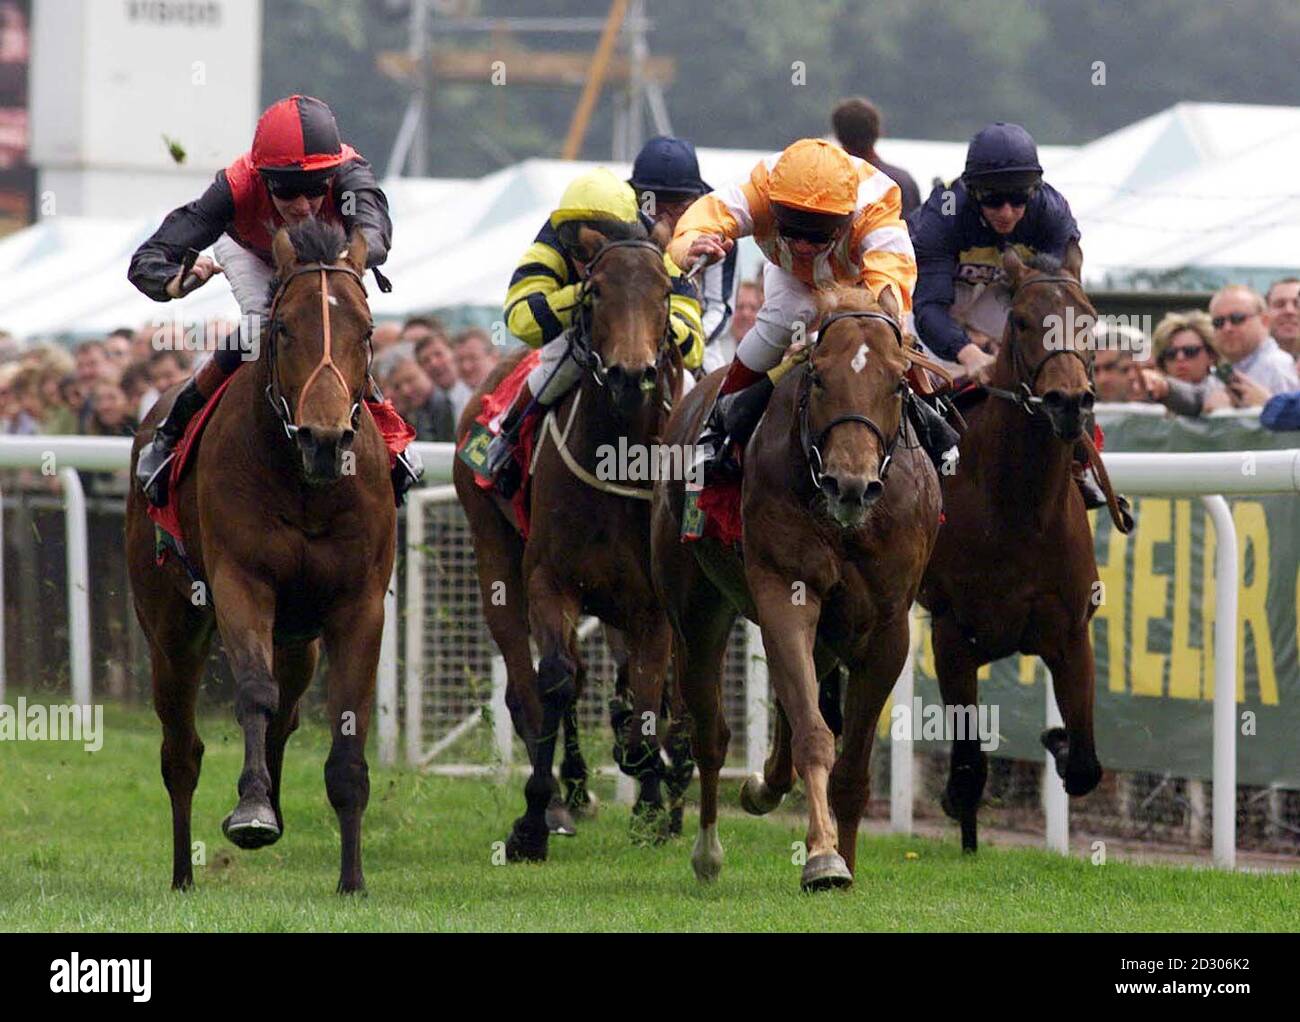 R. Hughes, riding Digital Image (far left), manages to hold off Frankie Dettori, riding Coco de Mer, to win the Joseph Heler Cheshire Cheese Lily Agnes Conditions Stakes on the opening day of the three day race meeting at Chester. Stock Photo